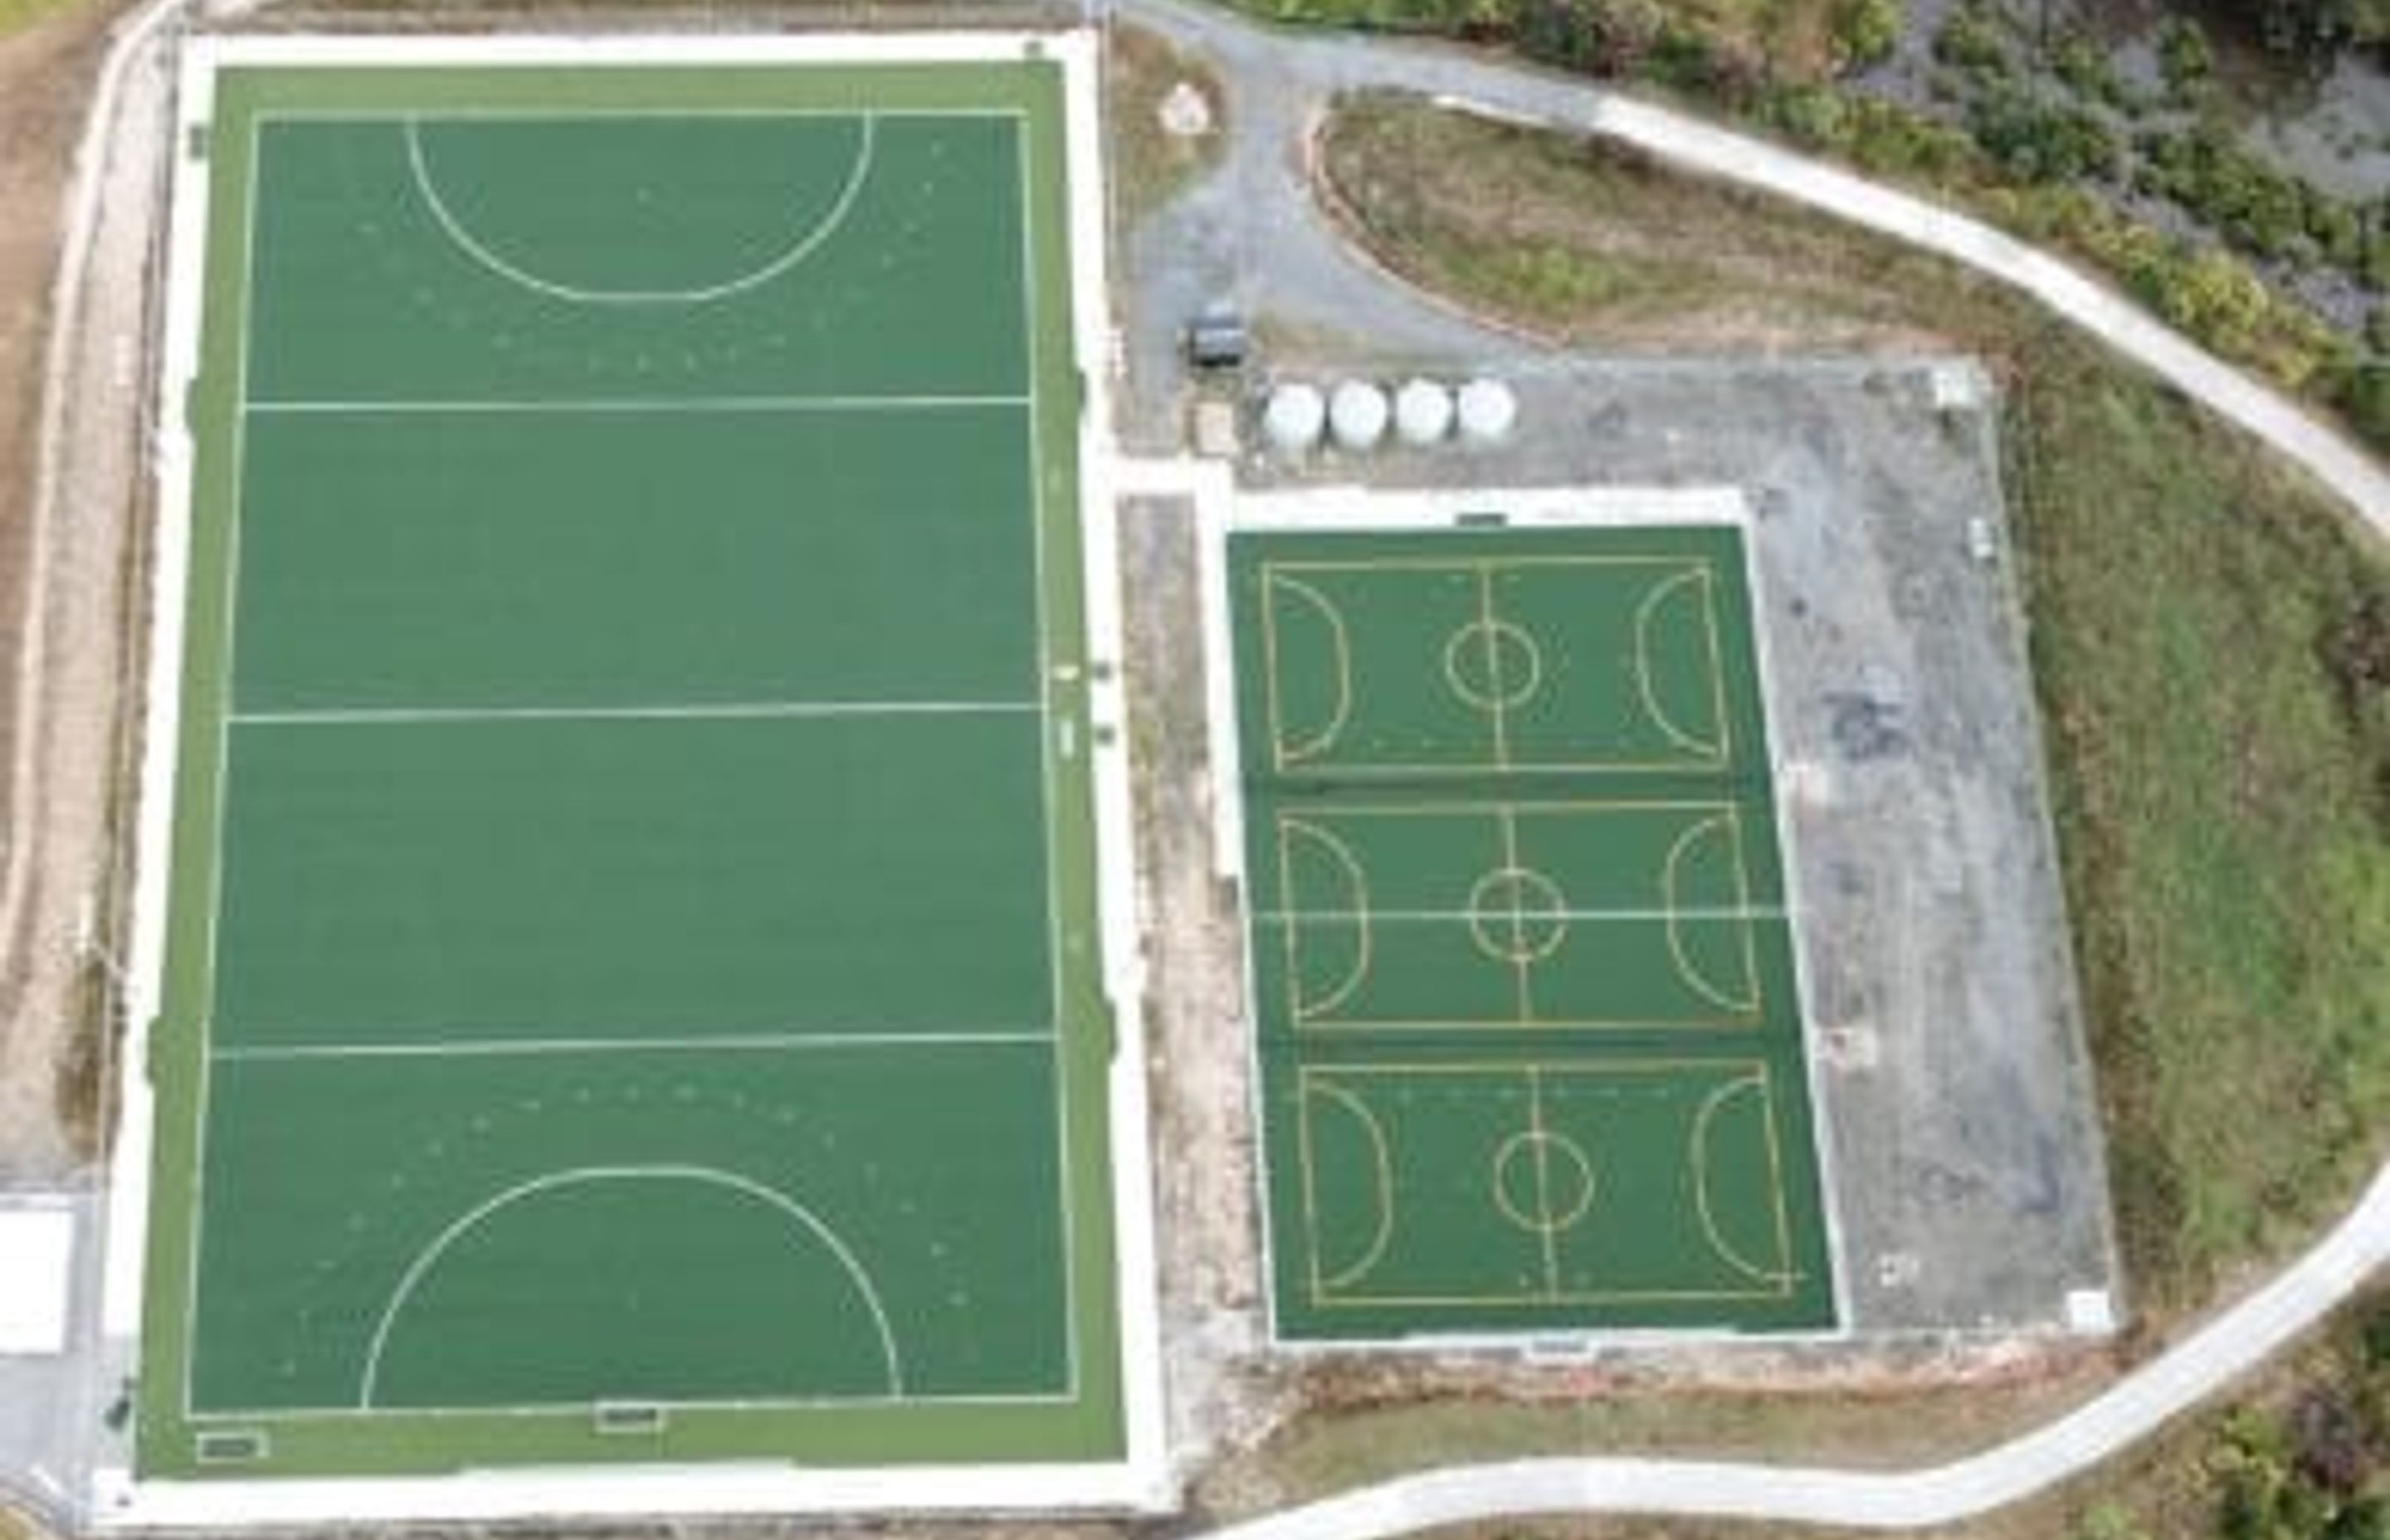 Artificial Turf for Hockey: Maintaining Your Hockey Pitch for Optimum Performance